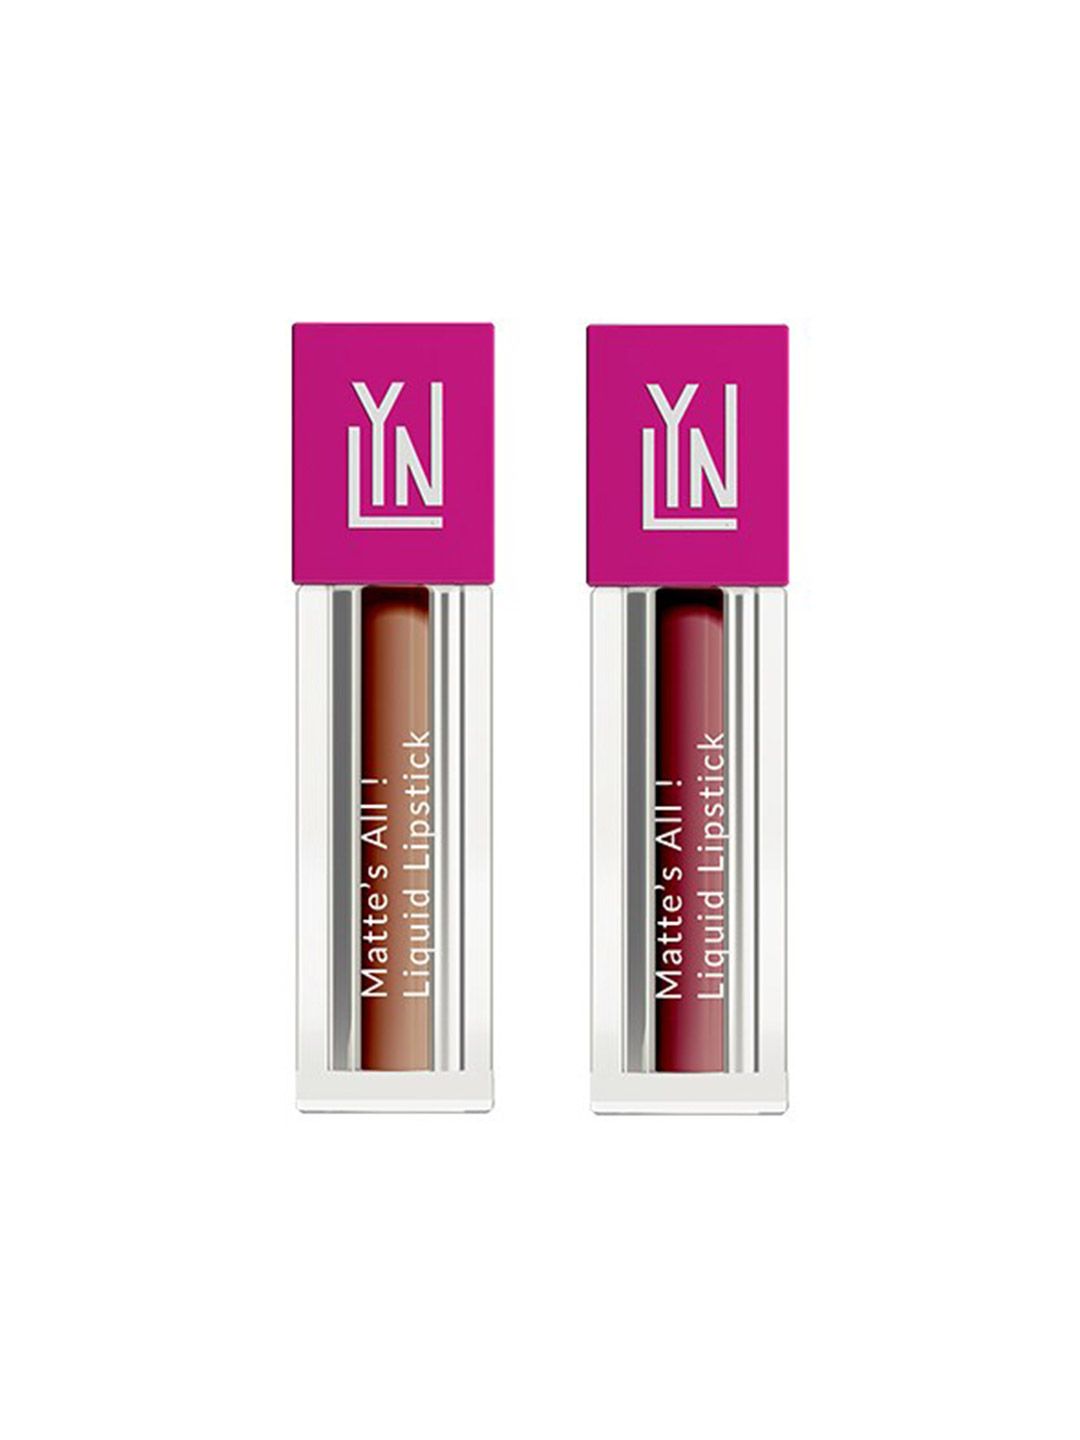 LYN LIVE YOUR NOW Set Of 2 Matte Liquid Lipstick Nude Energy & Good Mauve - 2ml Price in India